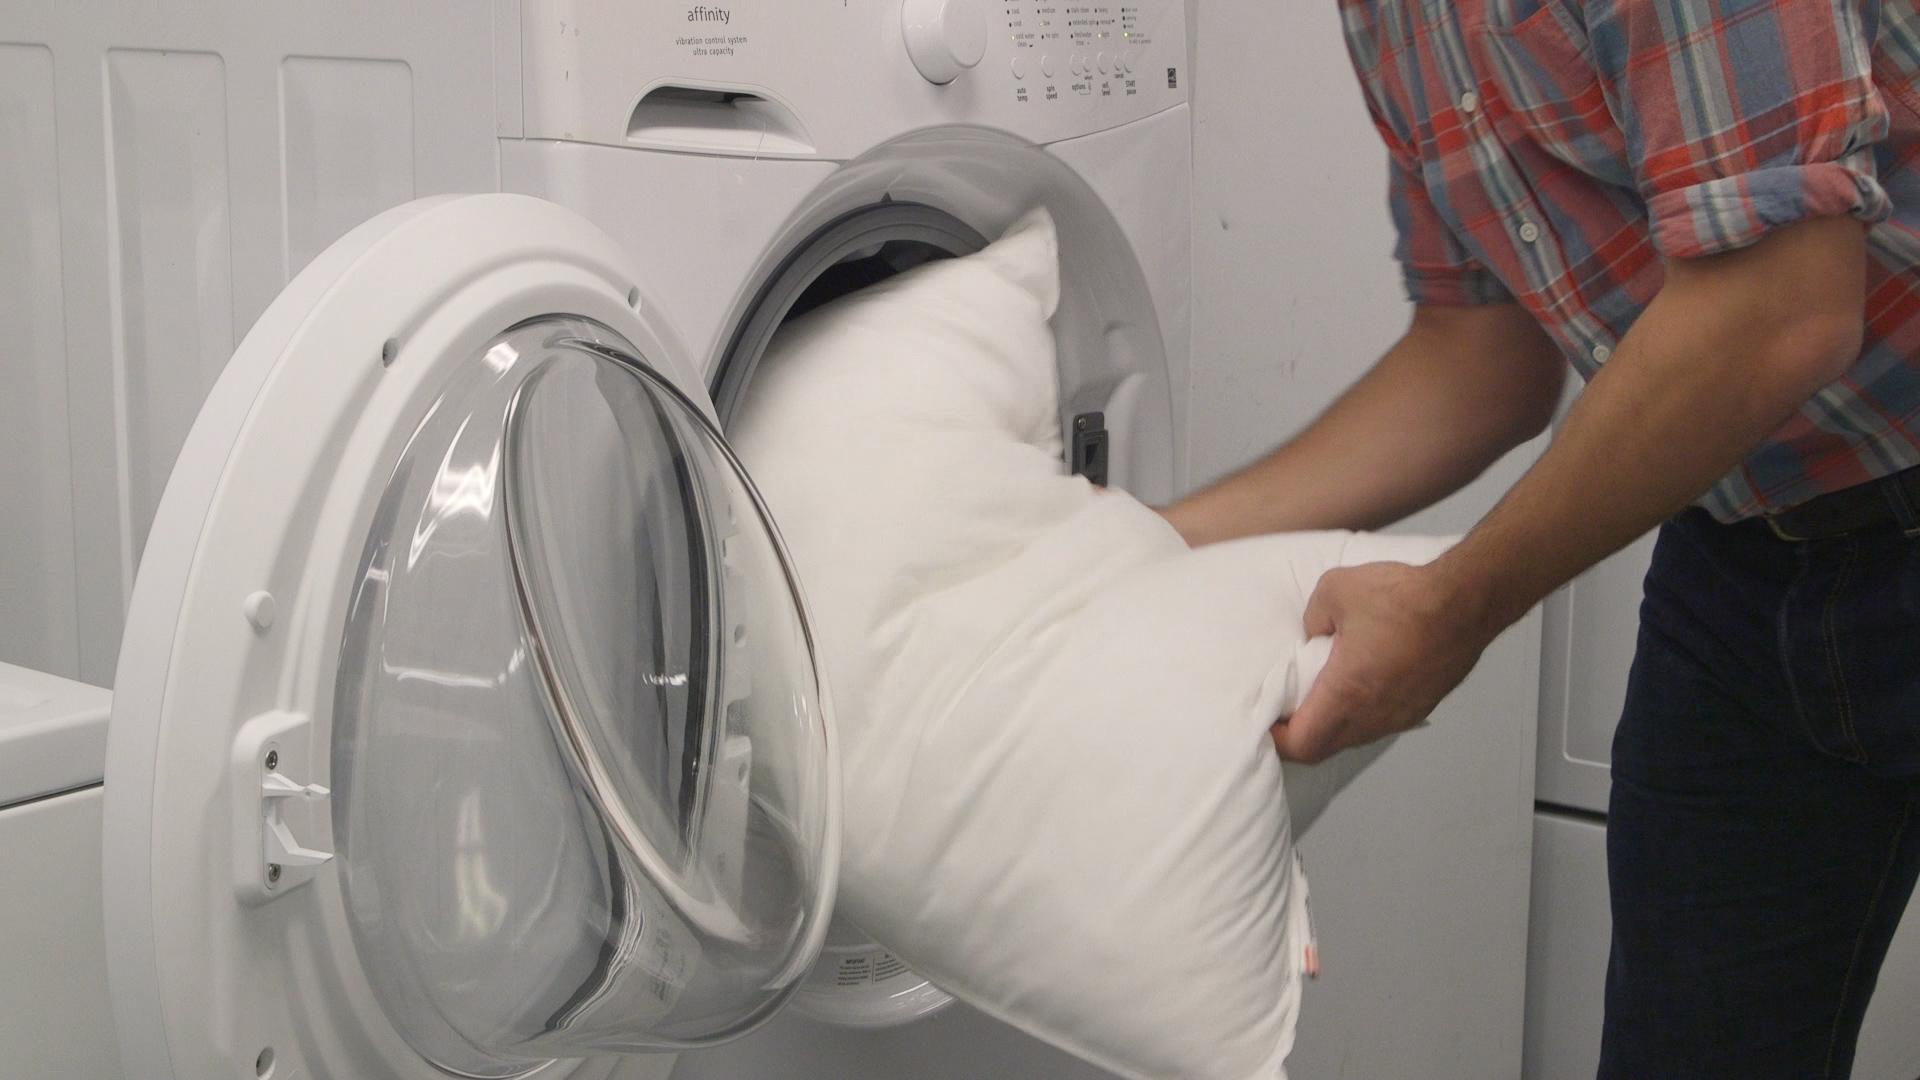 How To Fluff Pillows In The Dryer